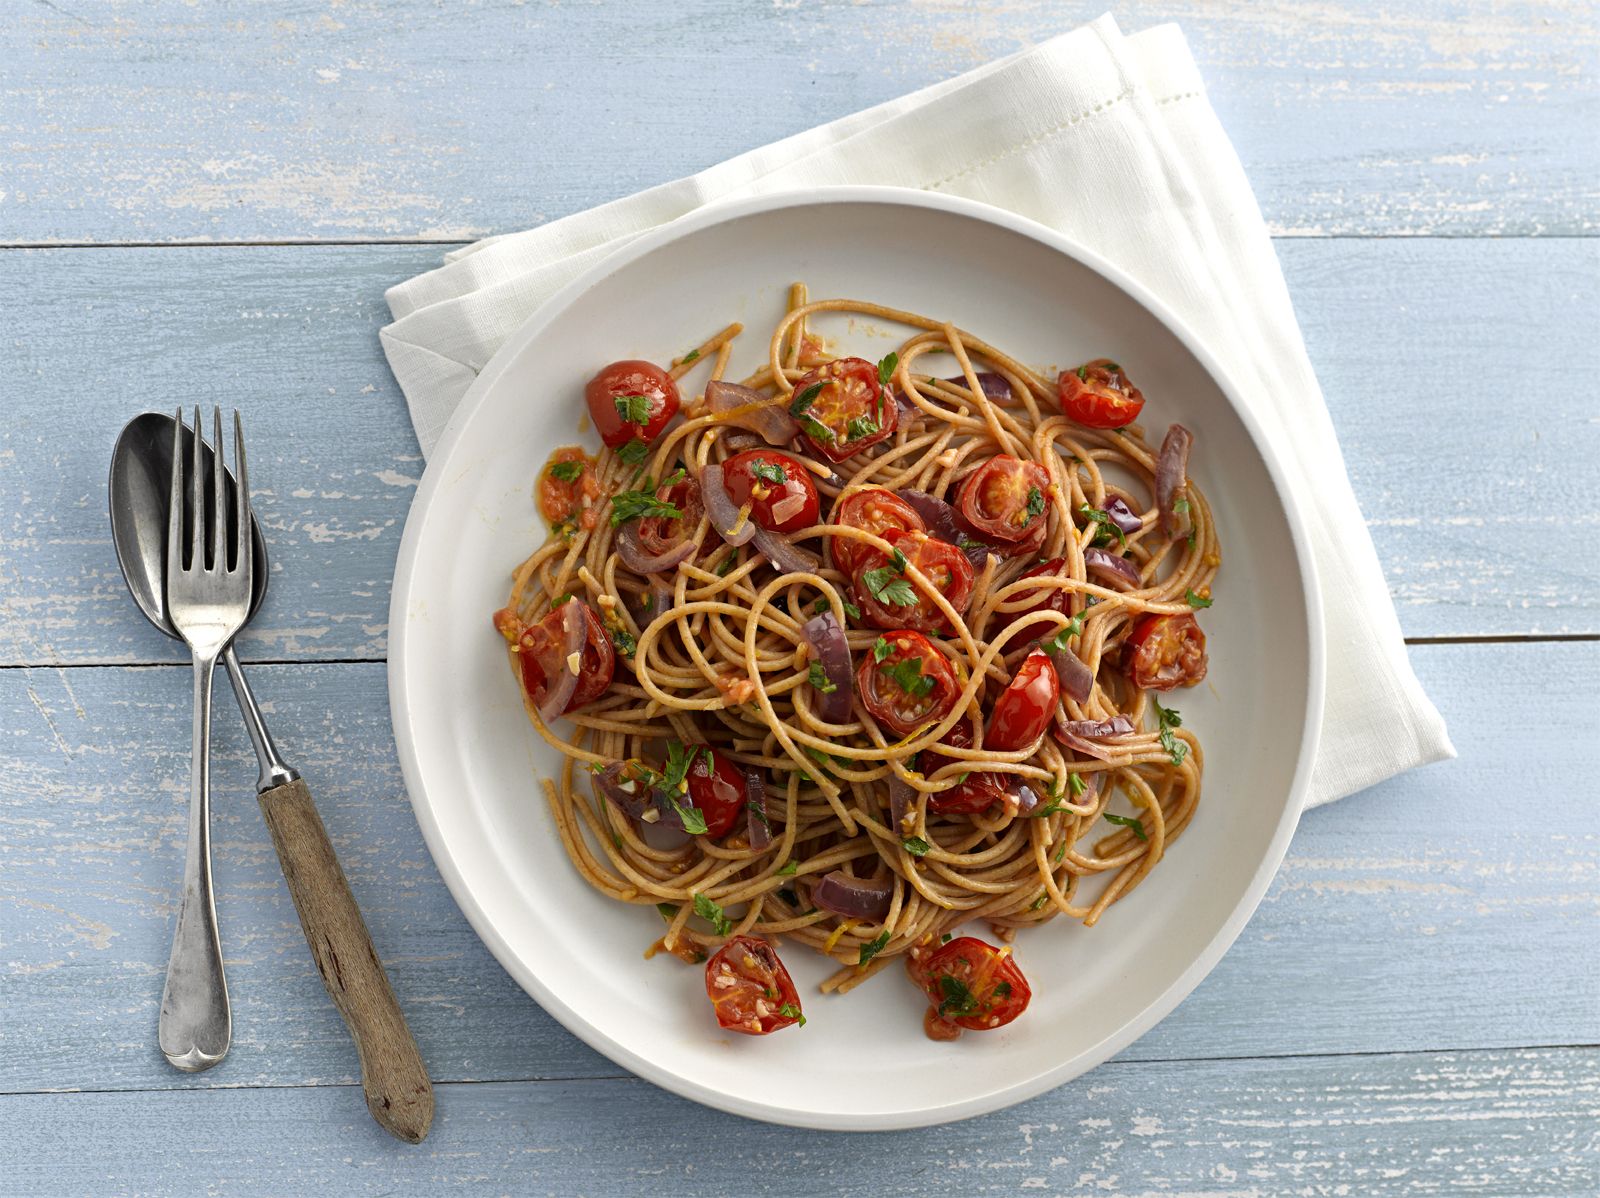 Delicious Vegetarian Spaghetti Recipes for Meatless Meals